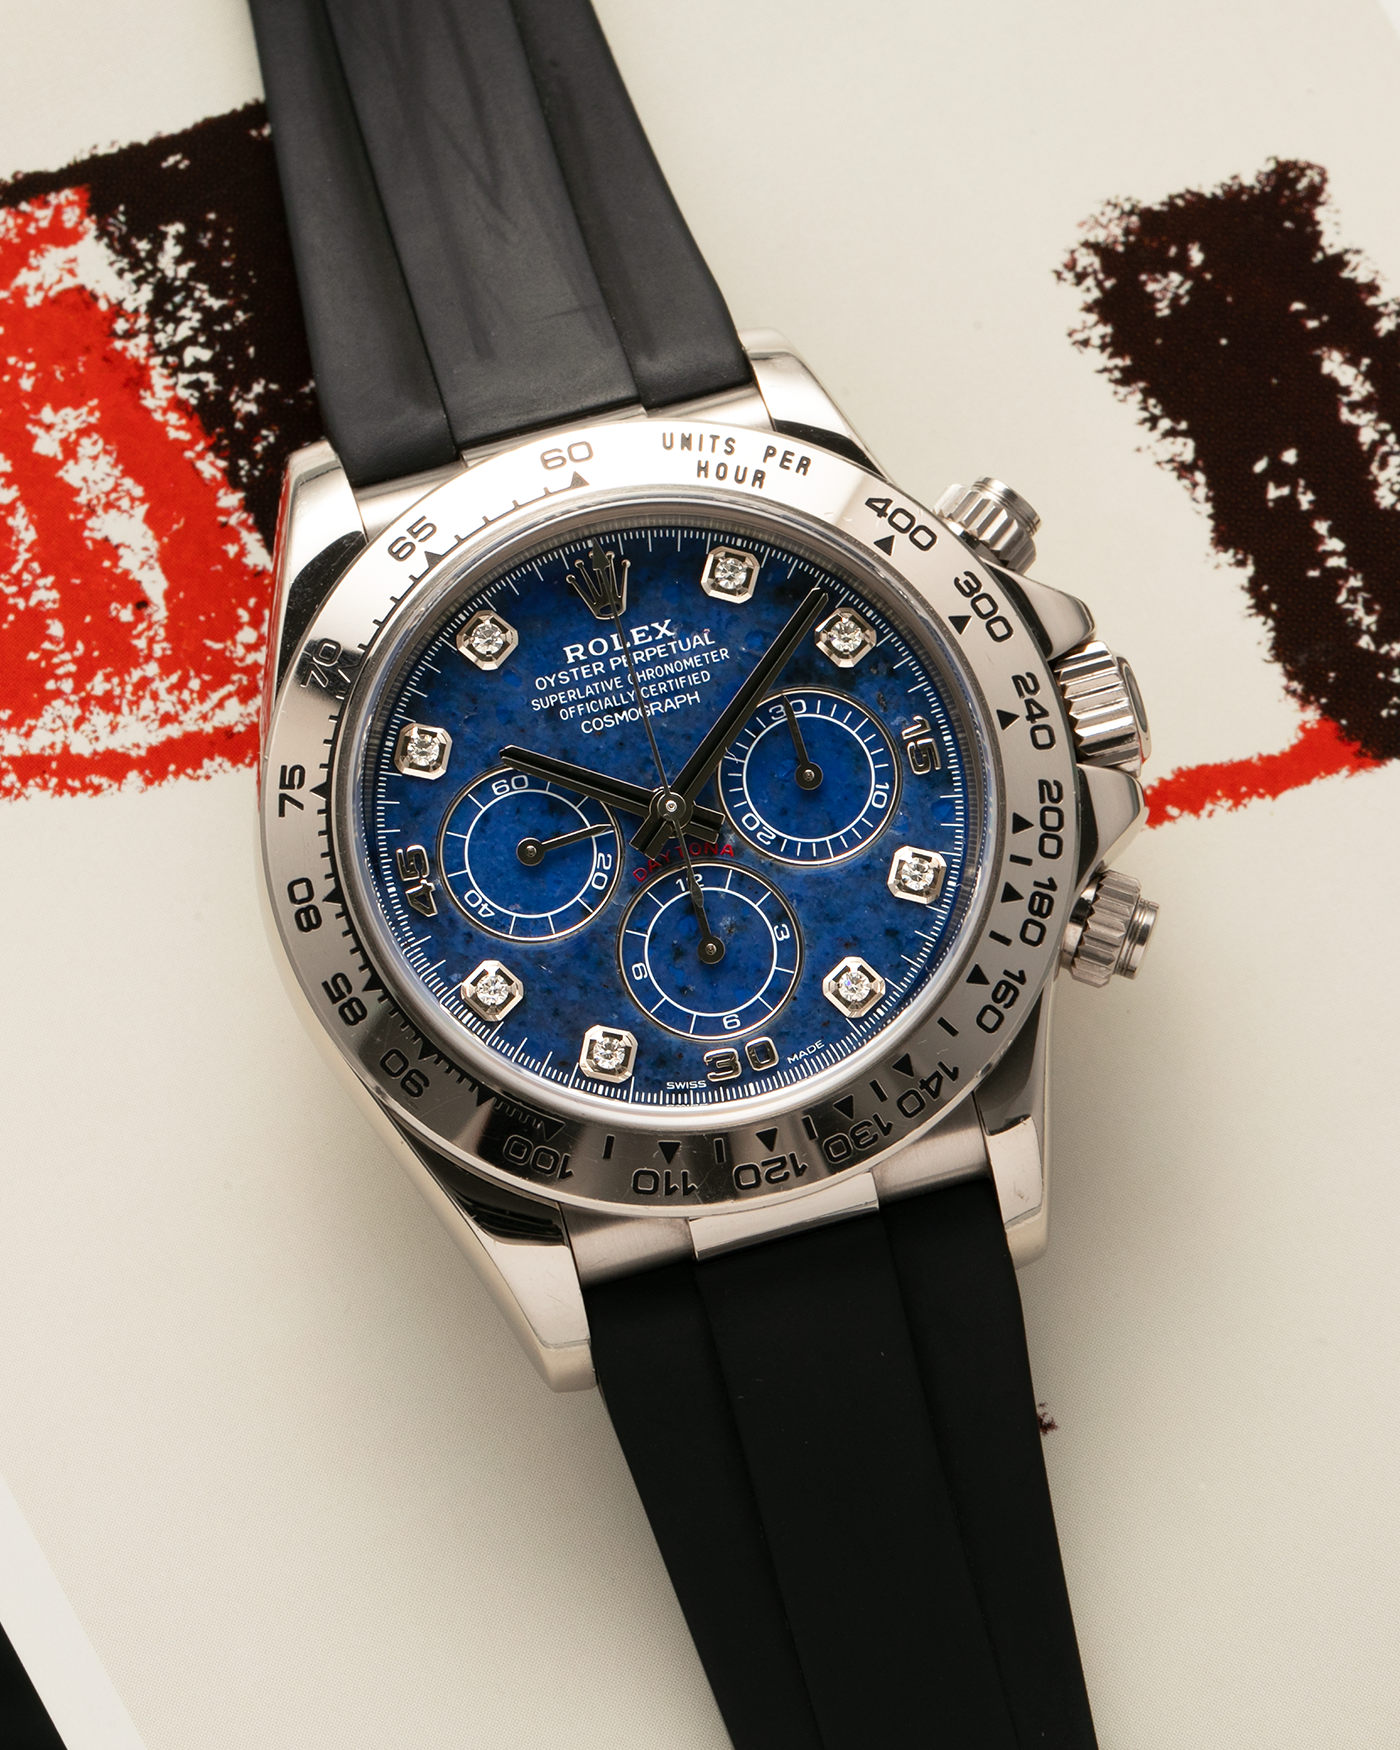 Brand: Rolex Year: 1999 Model: Cosmograph Daytona ‘Sodalite’ Reference: 16519 Serial Number: A112XXX Material: 18-carat White Gold Case, Sodalite Stone Dial, Diamond Hour Markers Movement: Rolex Cal. 4030 (Based on the Zenith El Primero Cal. 400), Self-Winding Case Diameter: 40mm Lug Width: 20mm Strap: Black Caoutchouc Rubber Strap with Signed 18-carat White Gold Deployant Clasp, with additional Swiss ABRT Ultramarine Alligator Leather Strap